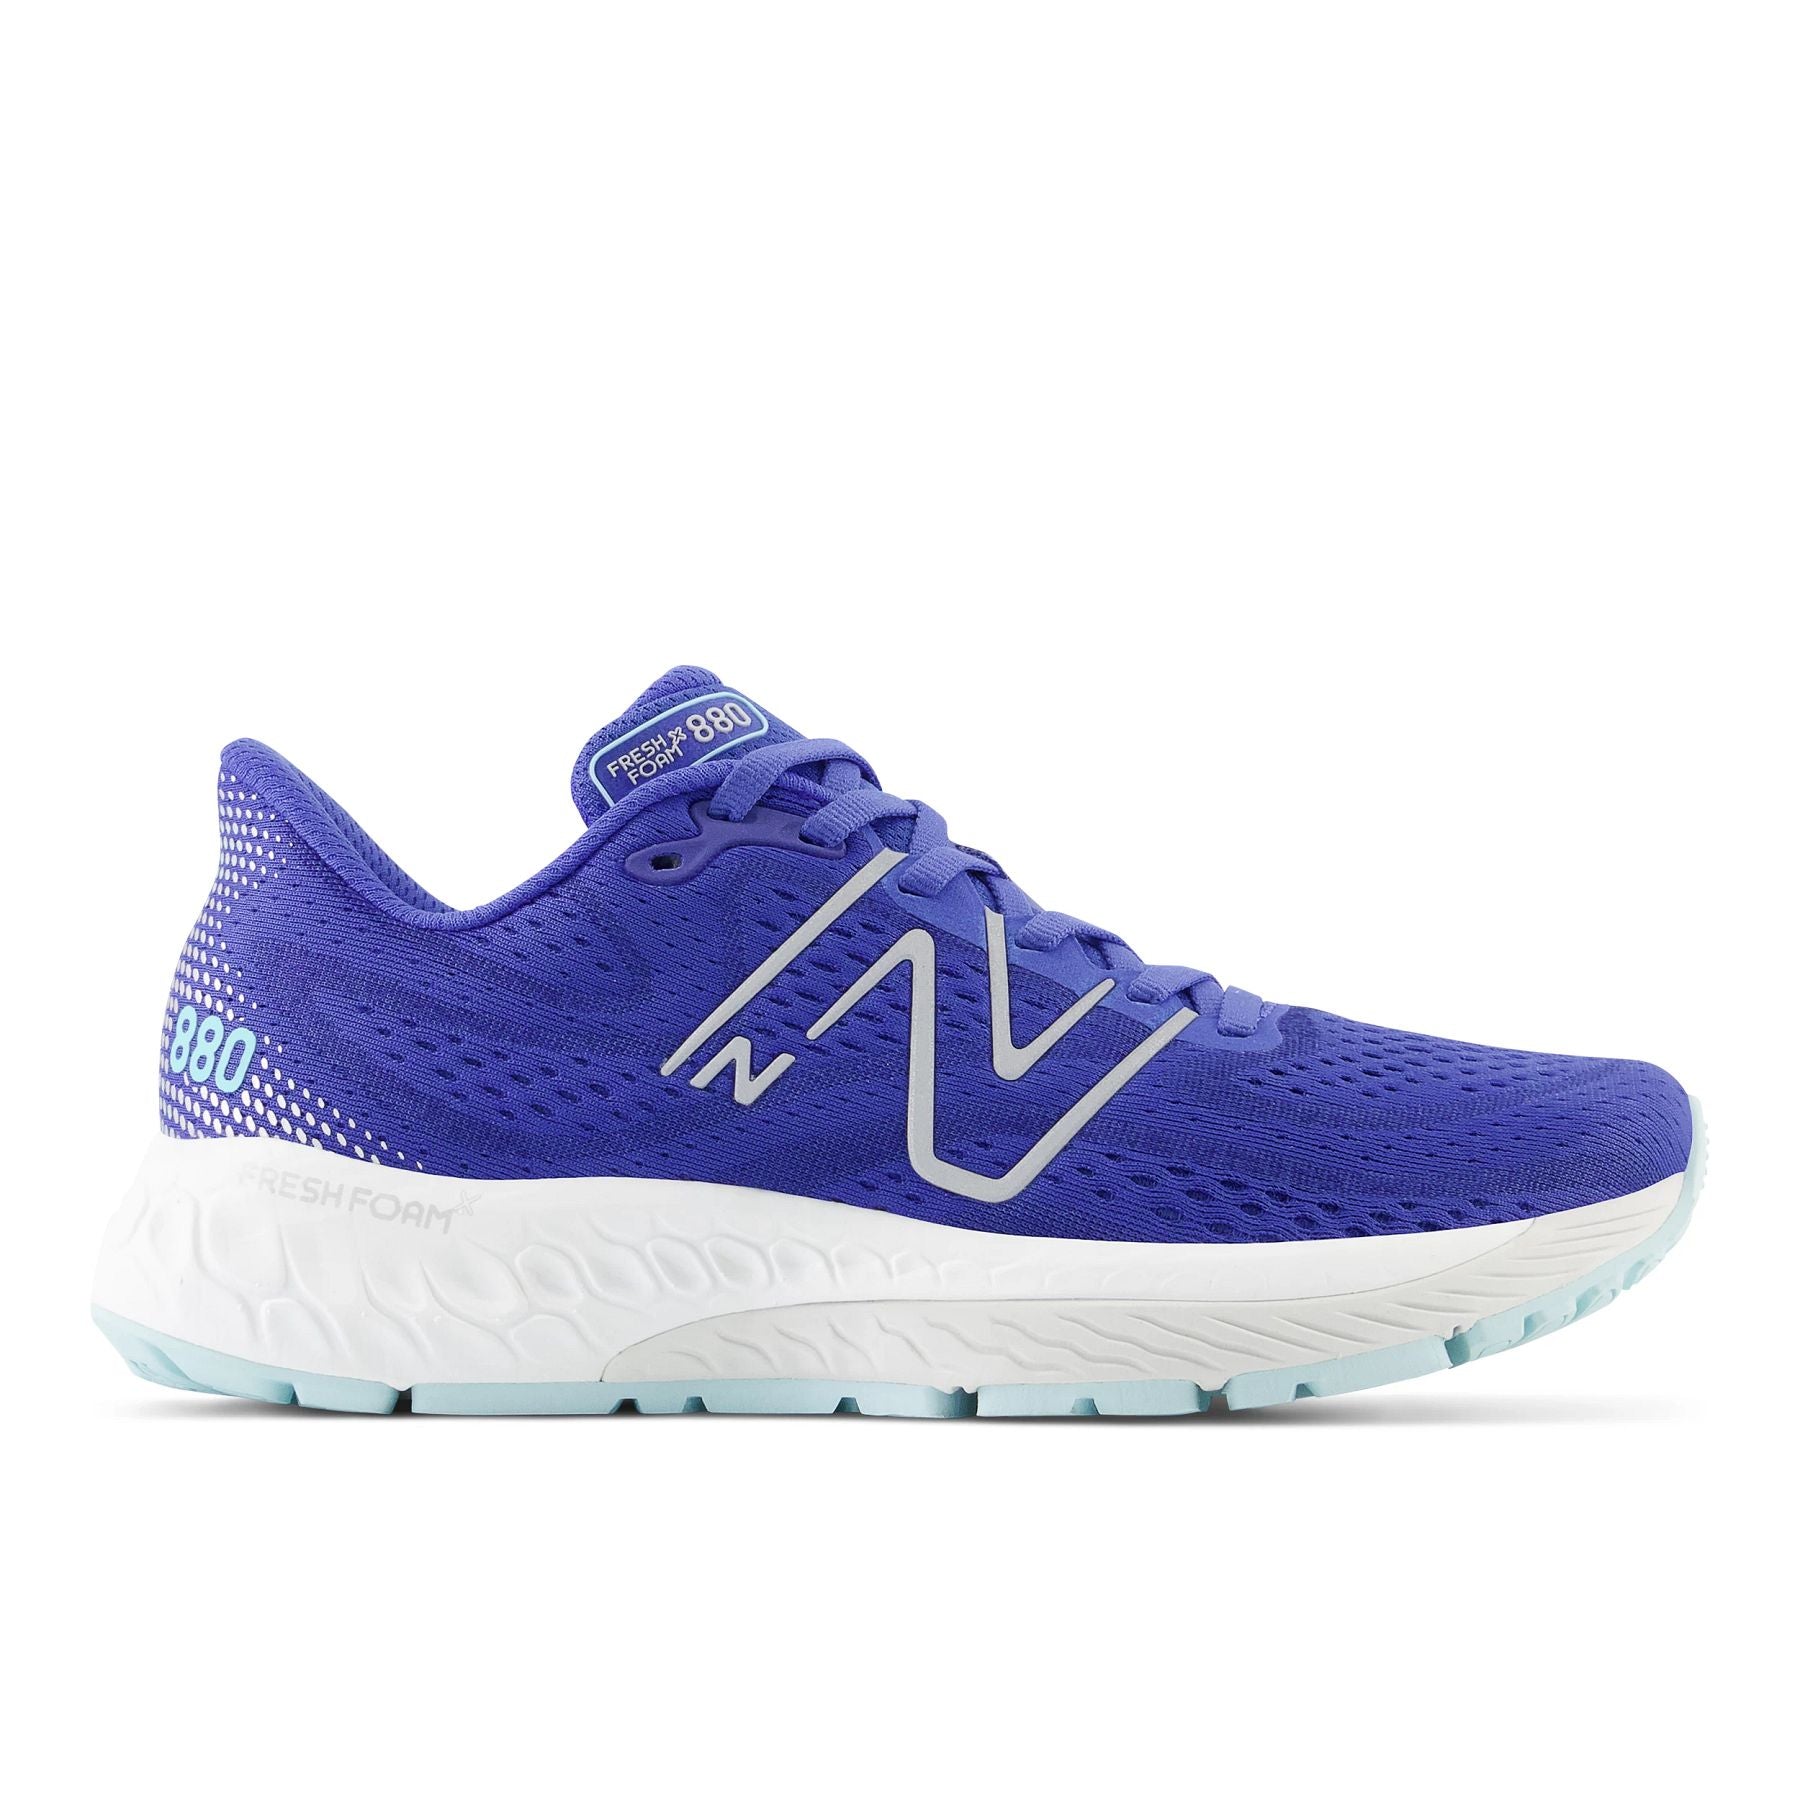 Lateral view of the Women's 880 V13 by New Balance in the color Marine Blue/Bright Cyan